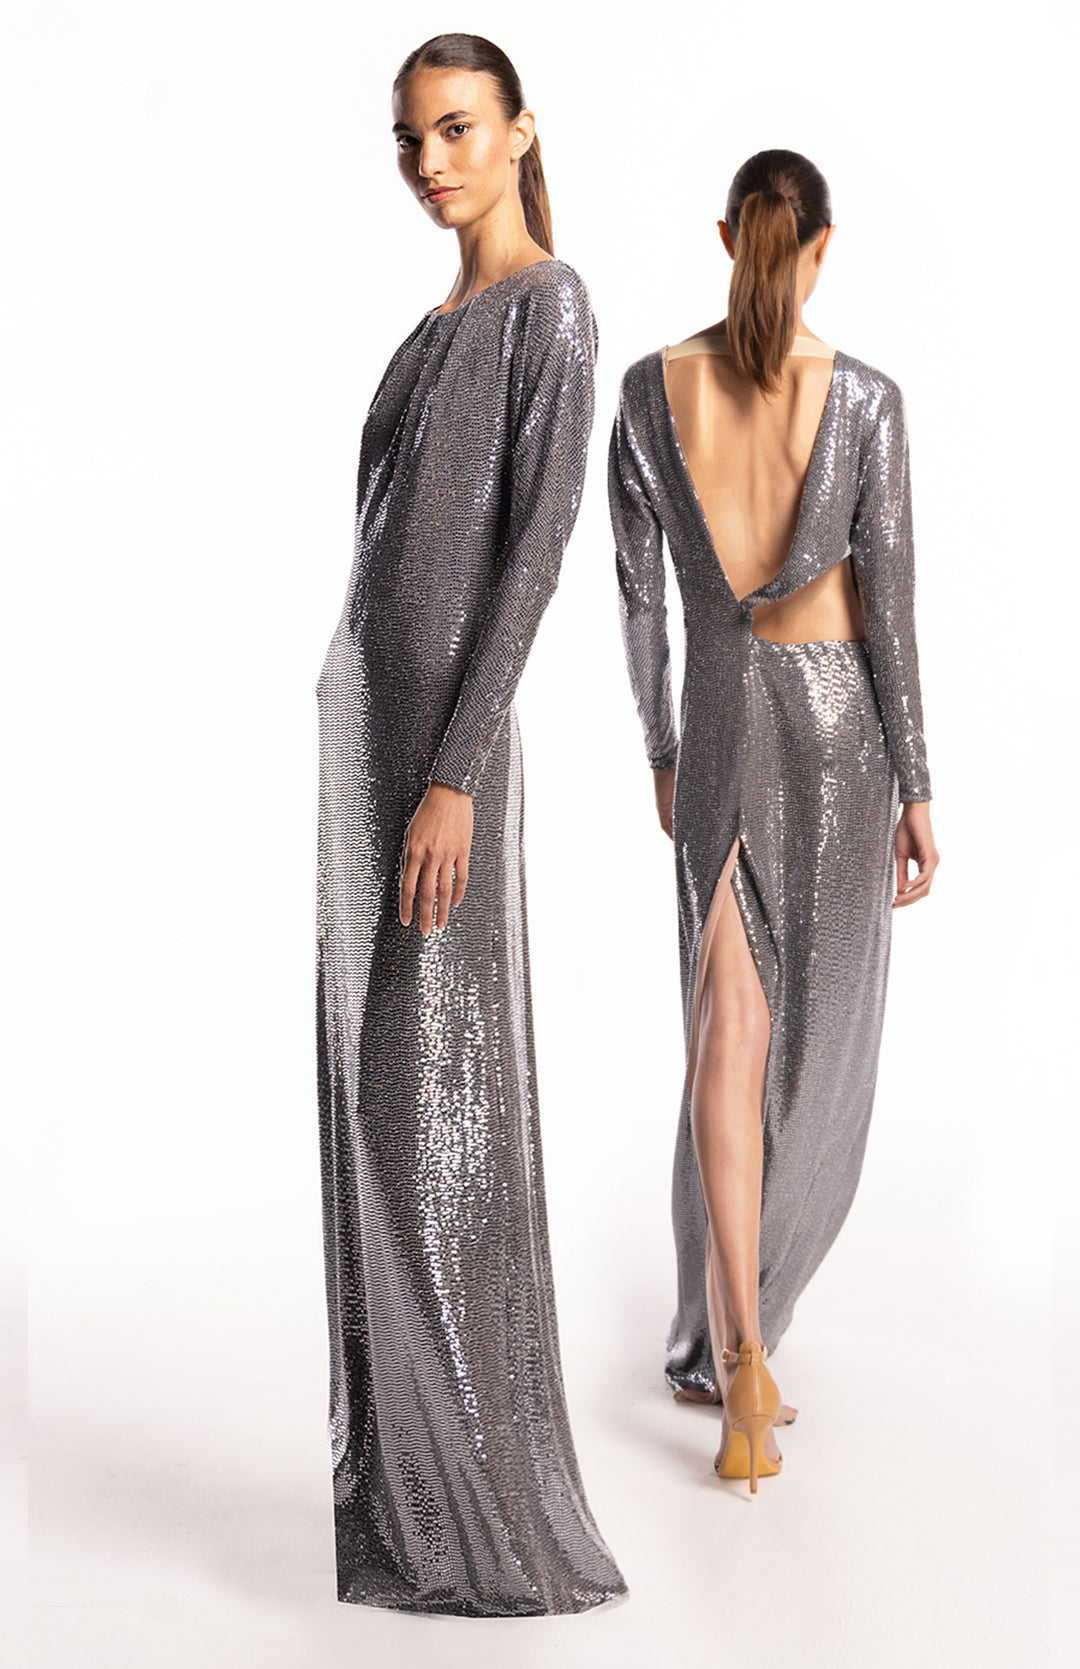 Promethea Glam | Irresistible Allure: Long Sequin Gown